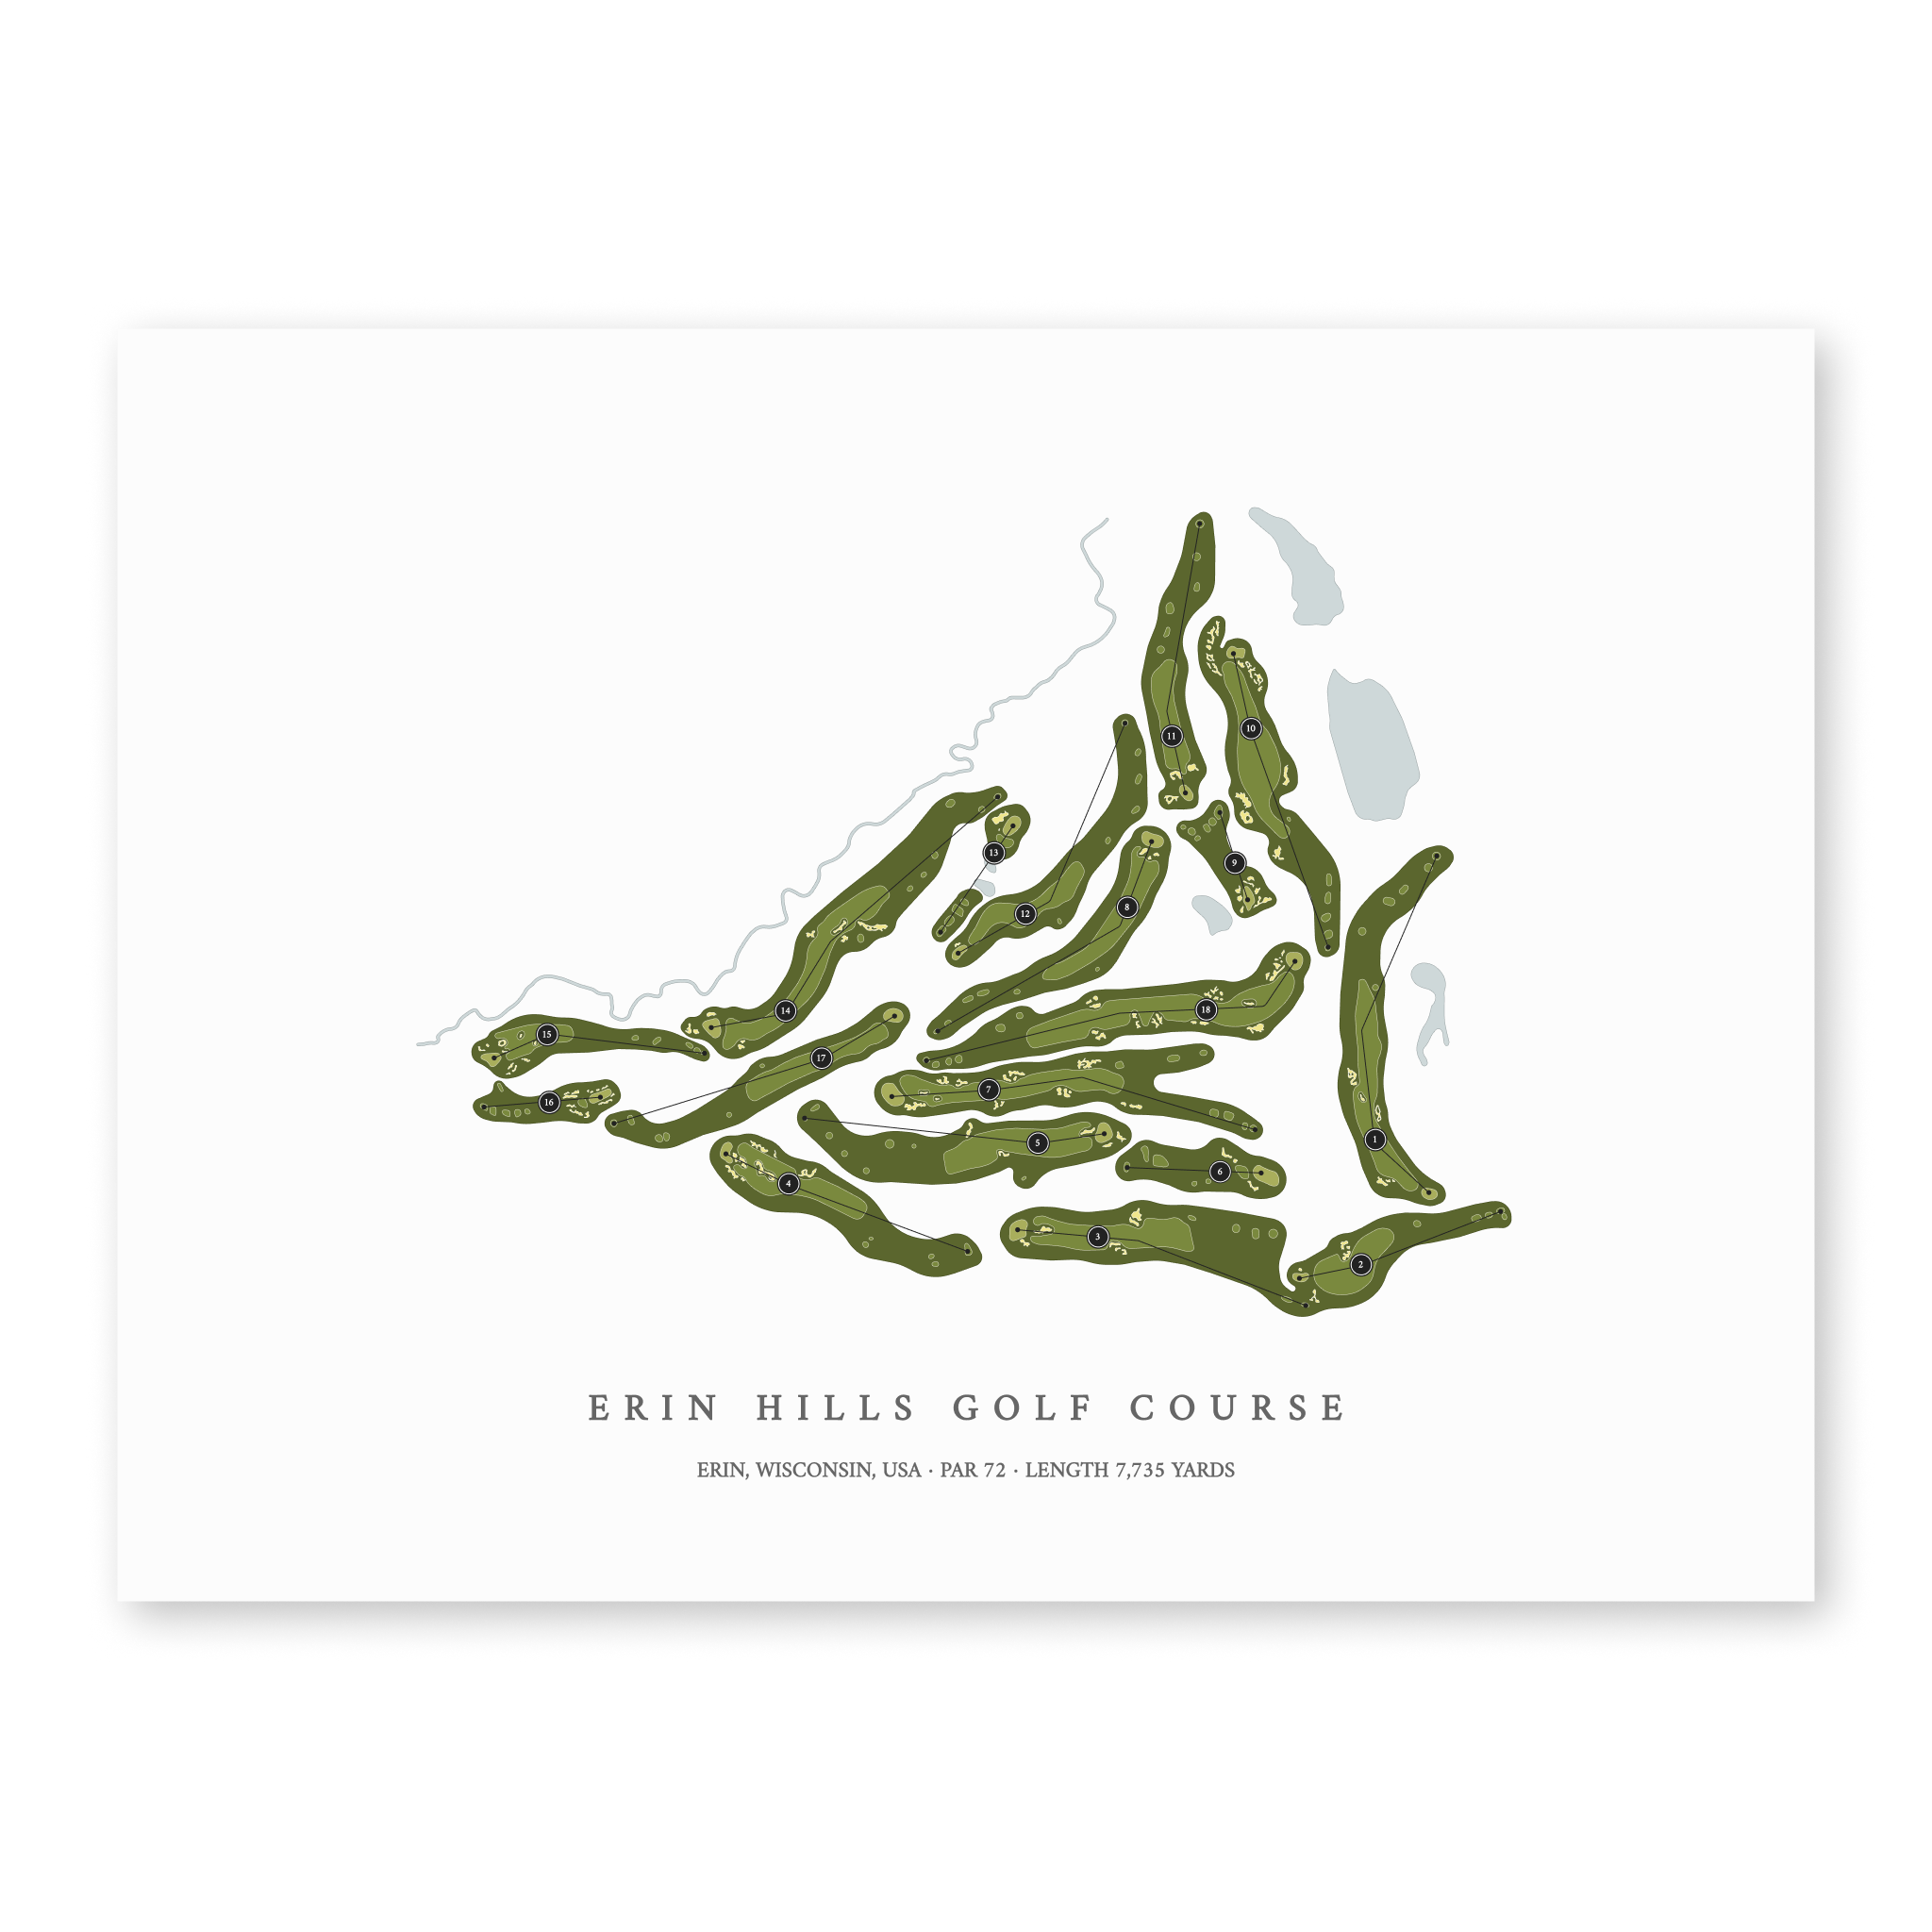 Erin Hills Golf Course| Golf Course Print | Unframed With Hole Numbers #hole numbers_yes